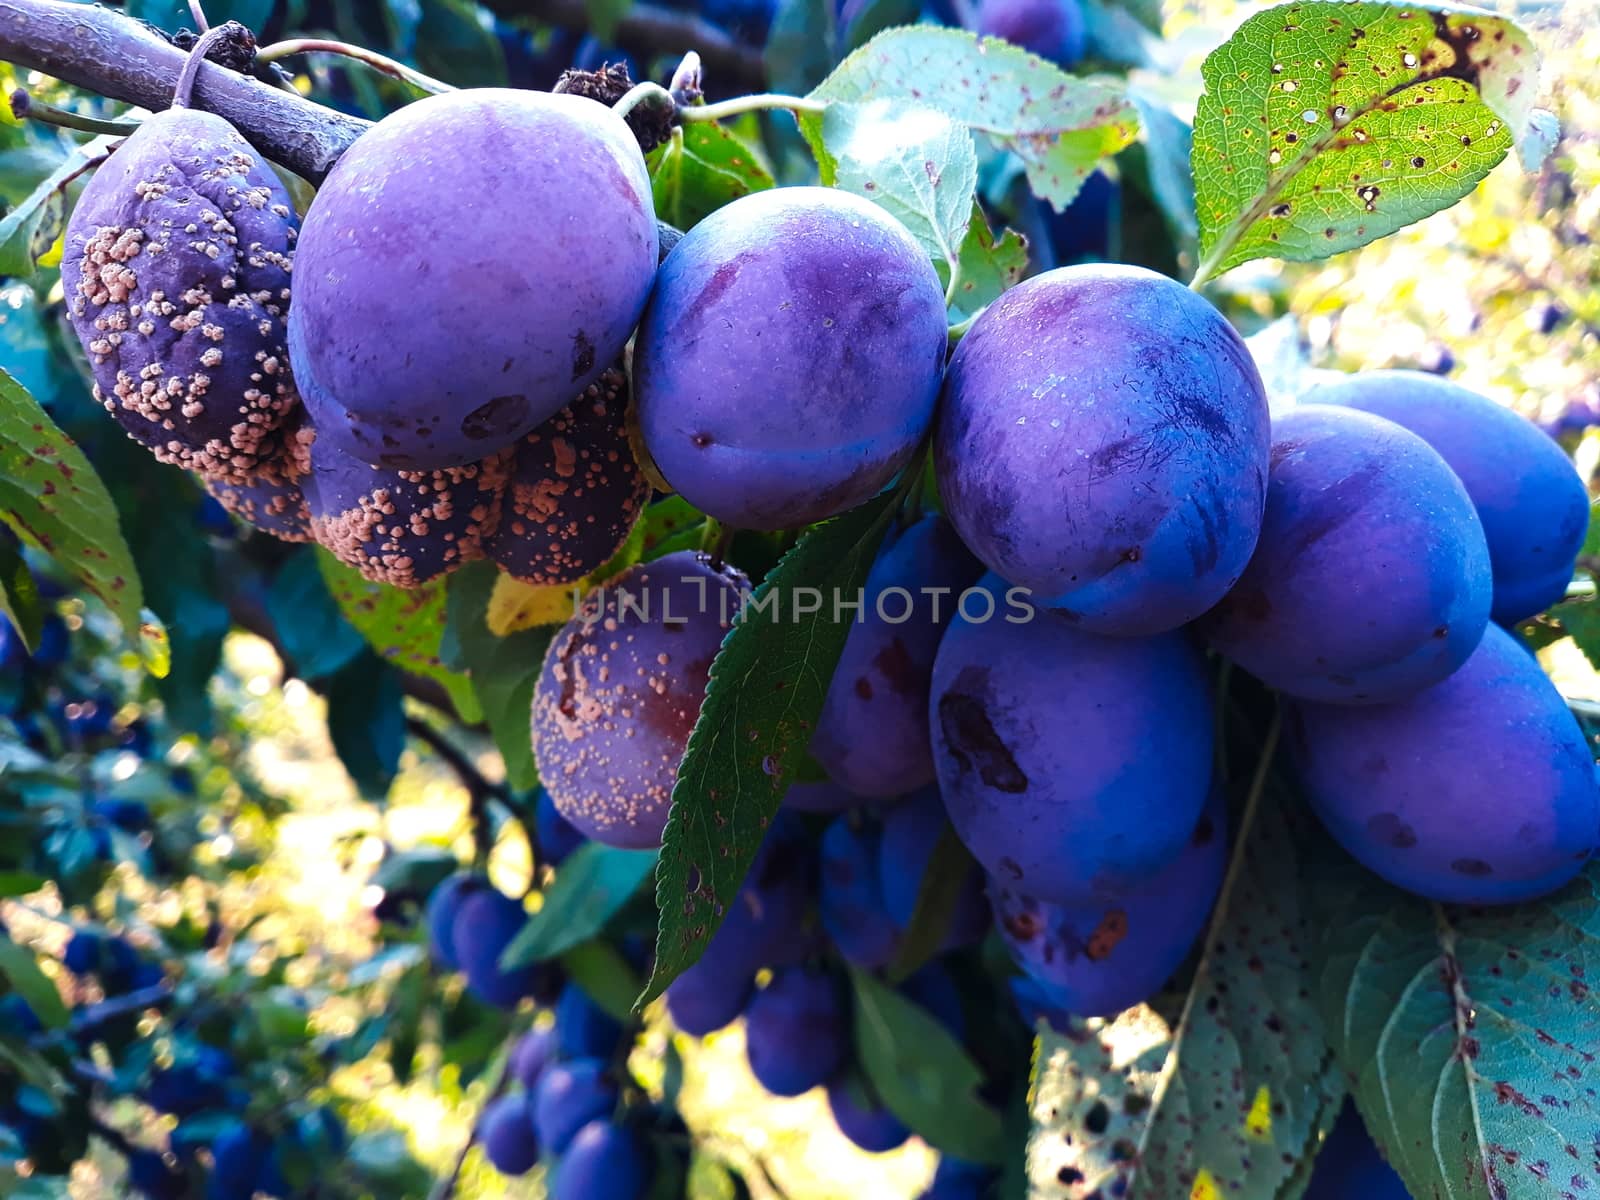 The group of the plums began to rot on the branch. Zavidovici, Bosnia and Herzegovina.